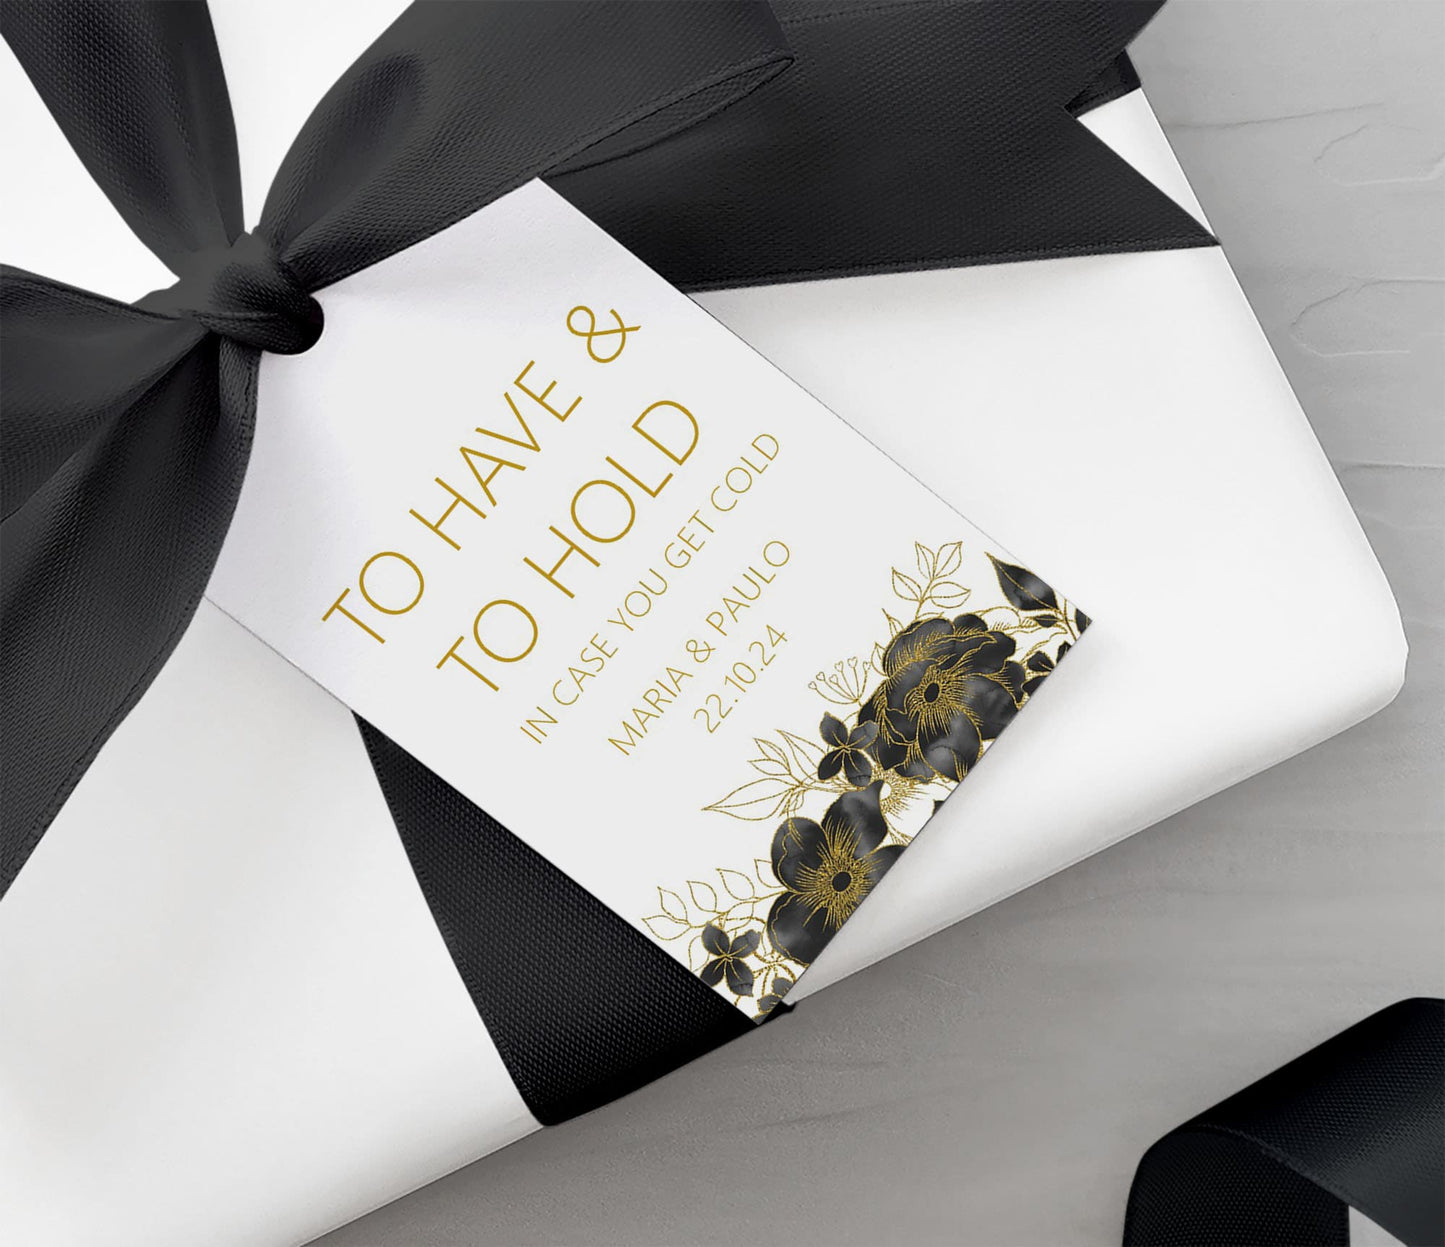 To Have And To Hold, Black & Gold Favour Gift Tags, Personalised pack of 10